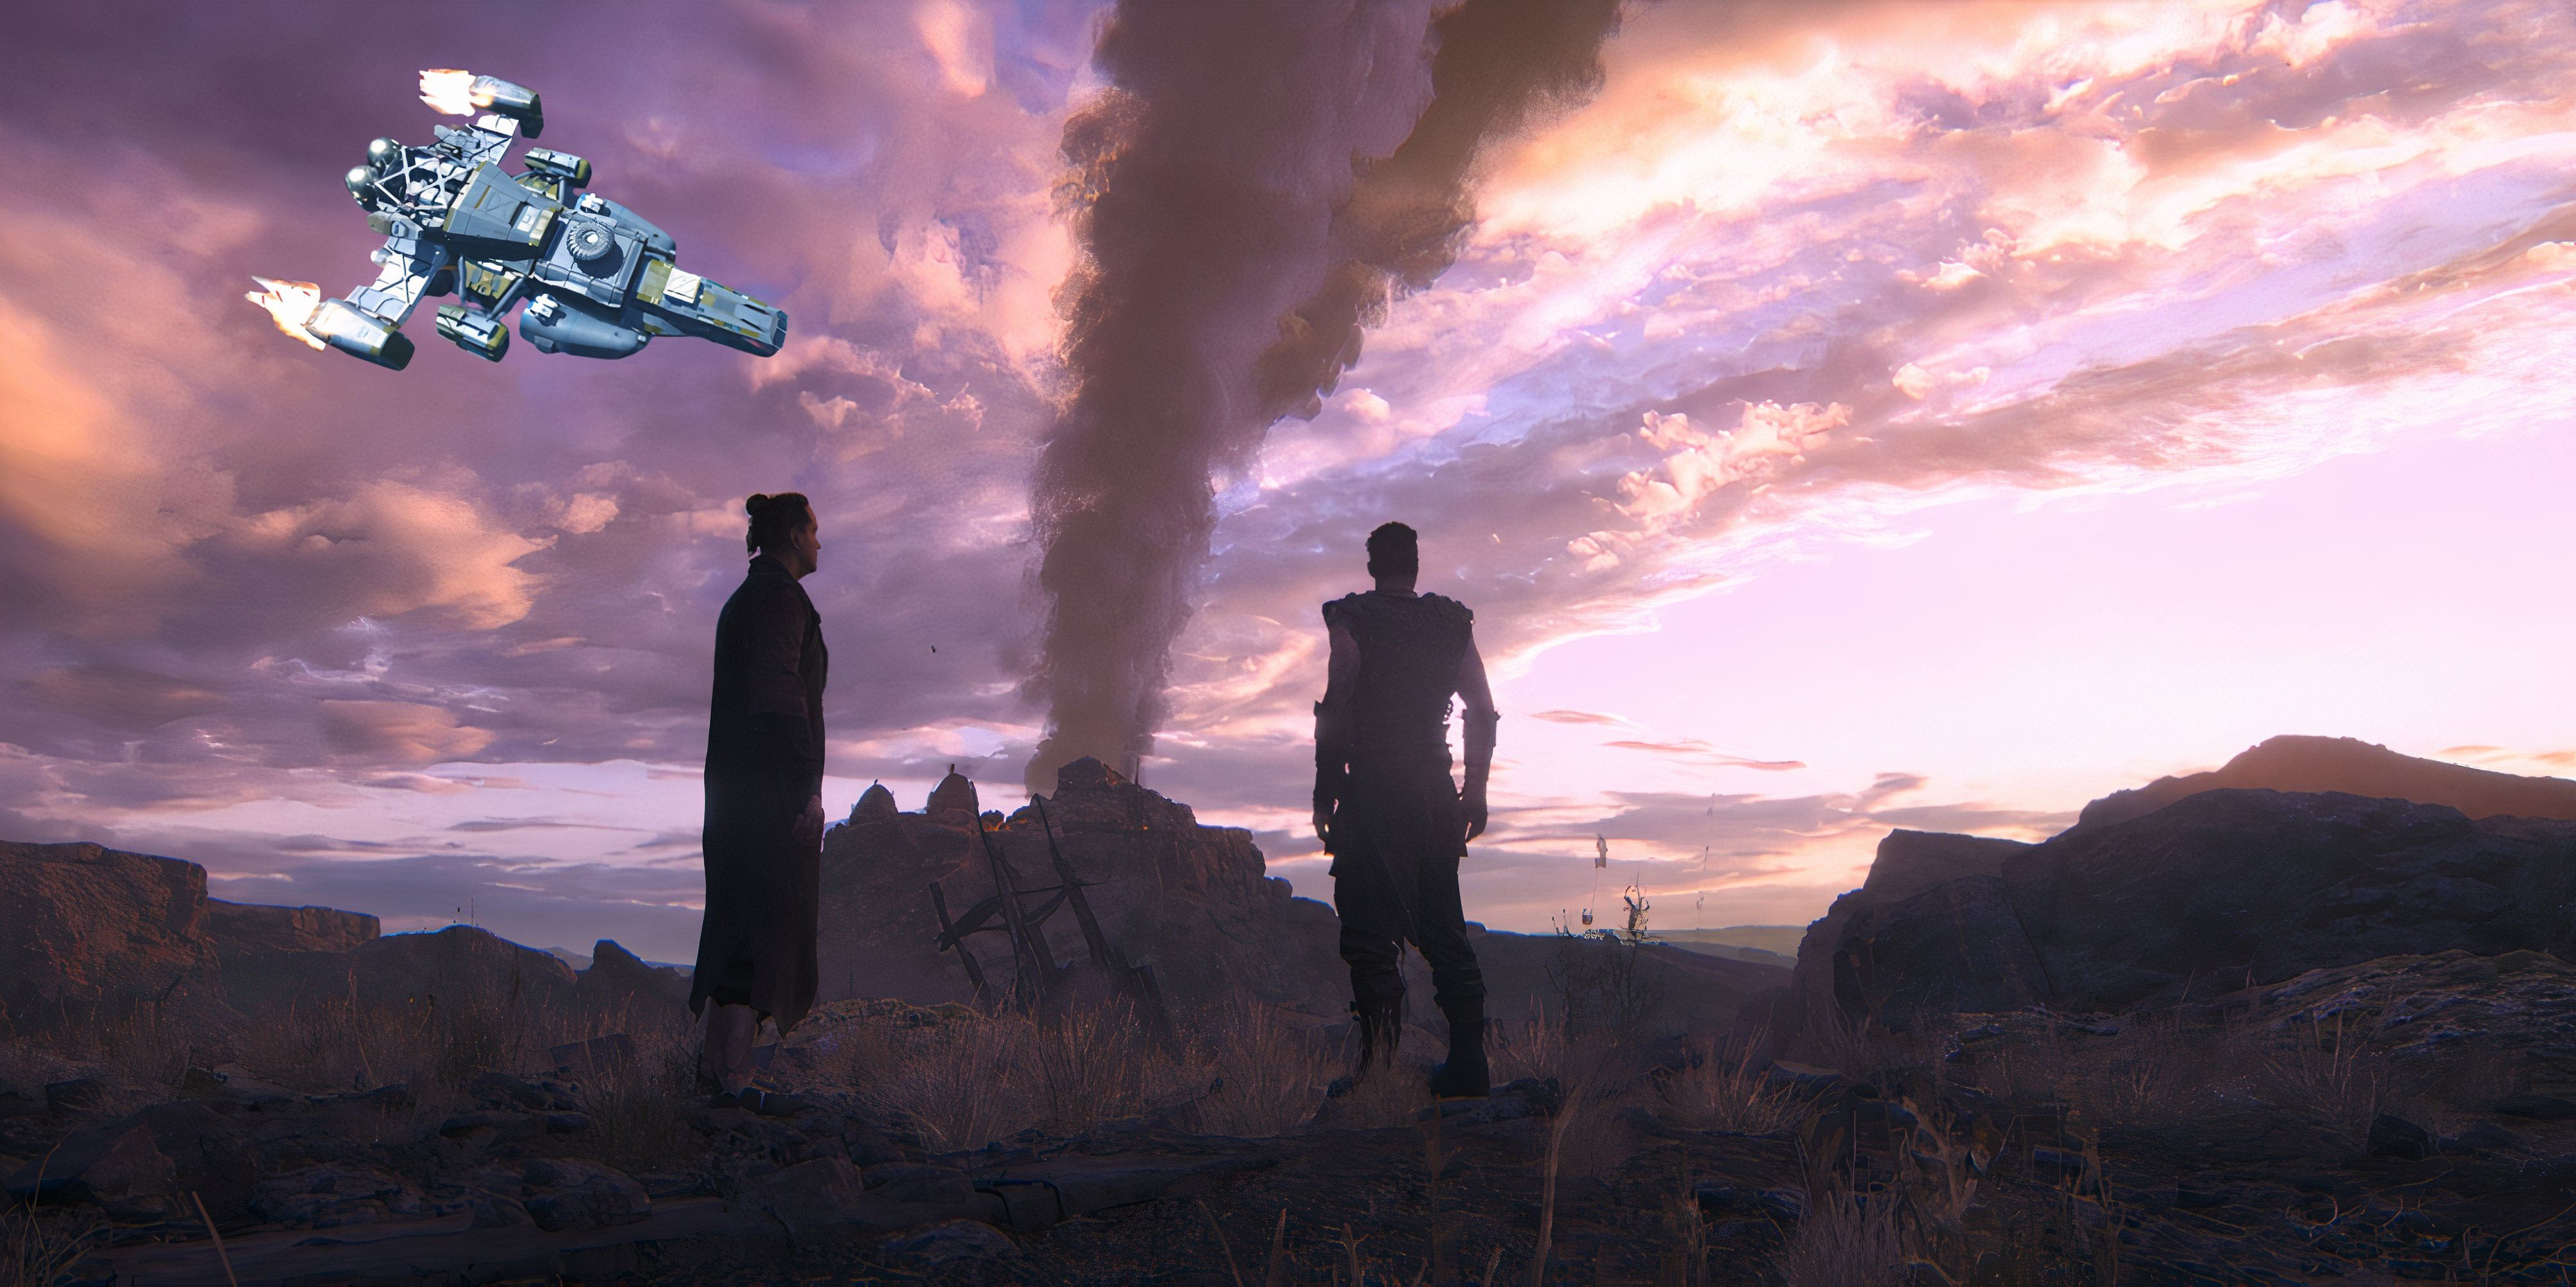 Starfield ship in the sky above Hellblade 2 screen of sunset